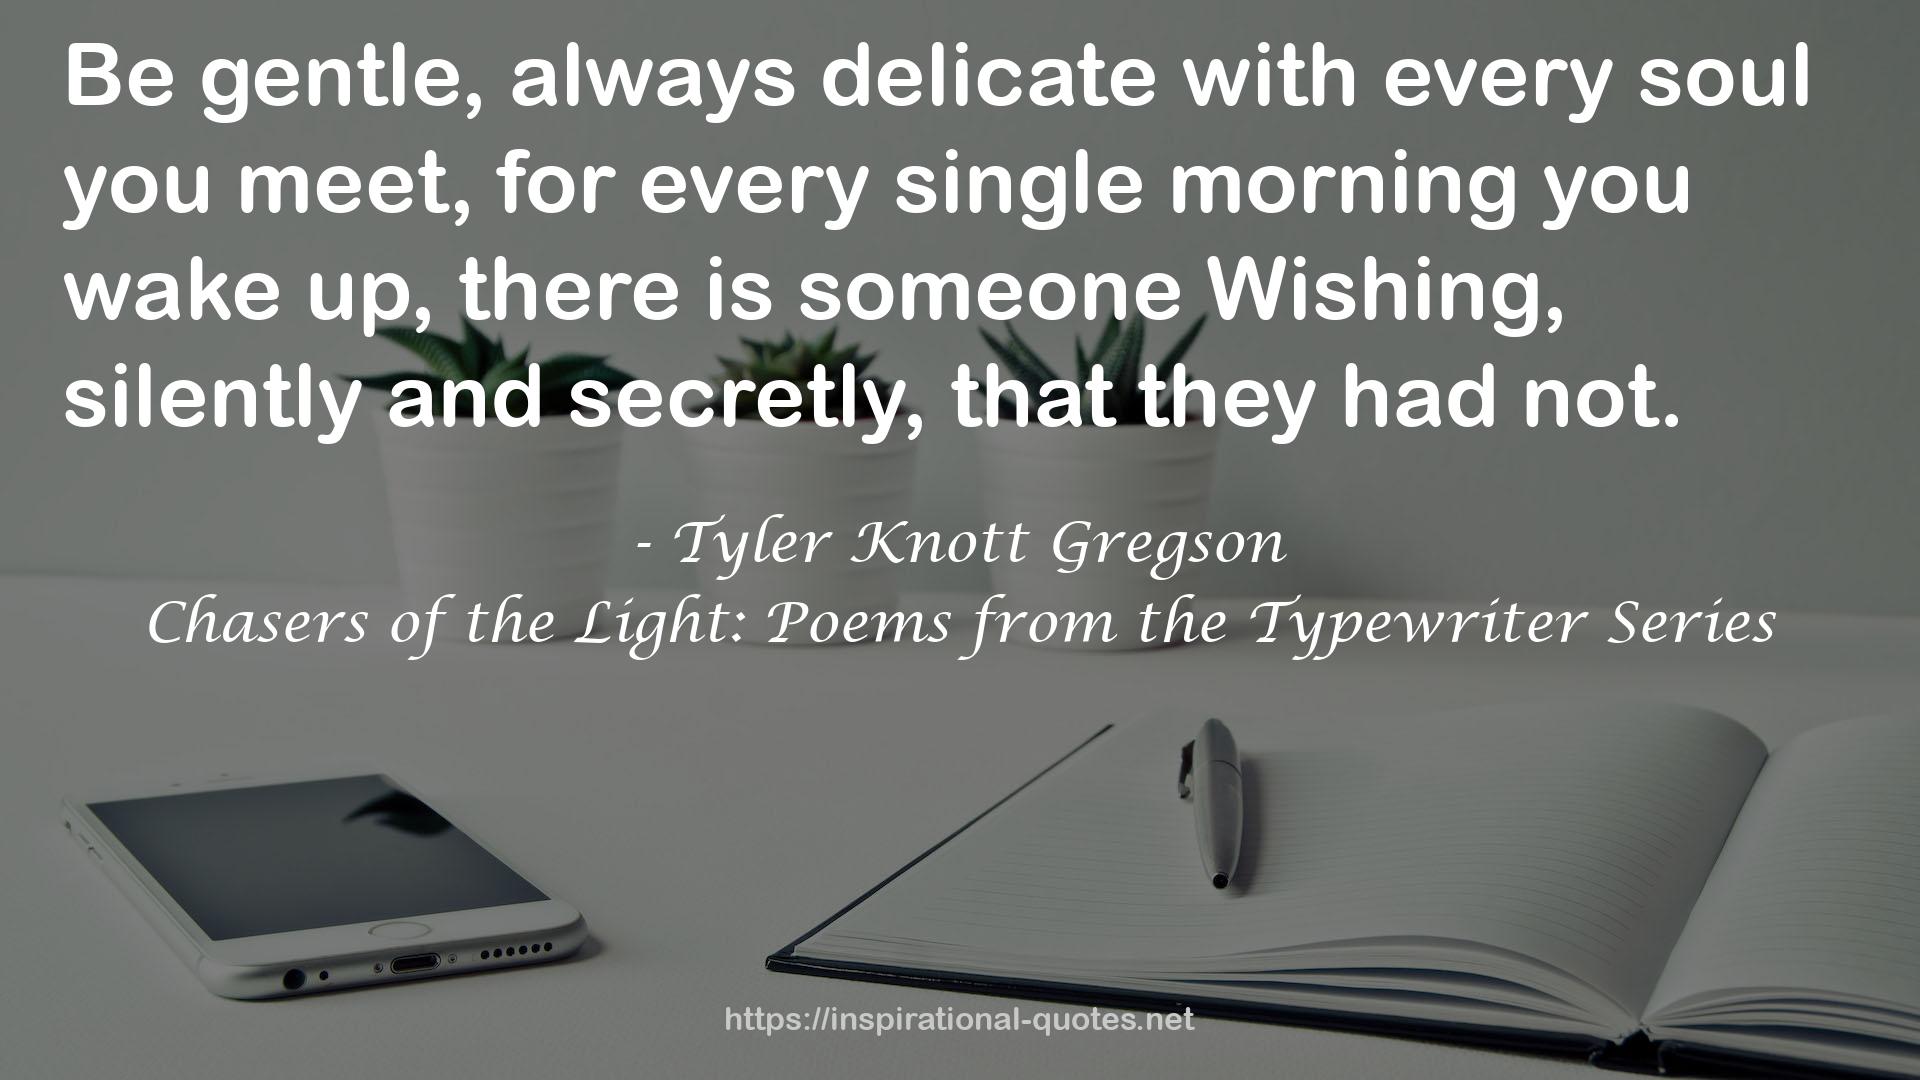 Chasers of the Light: Poems from the Typewriter Series QUOTES